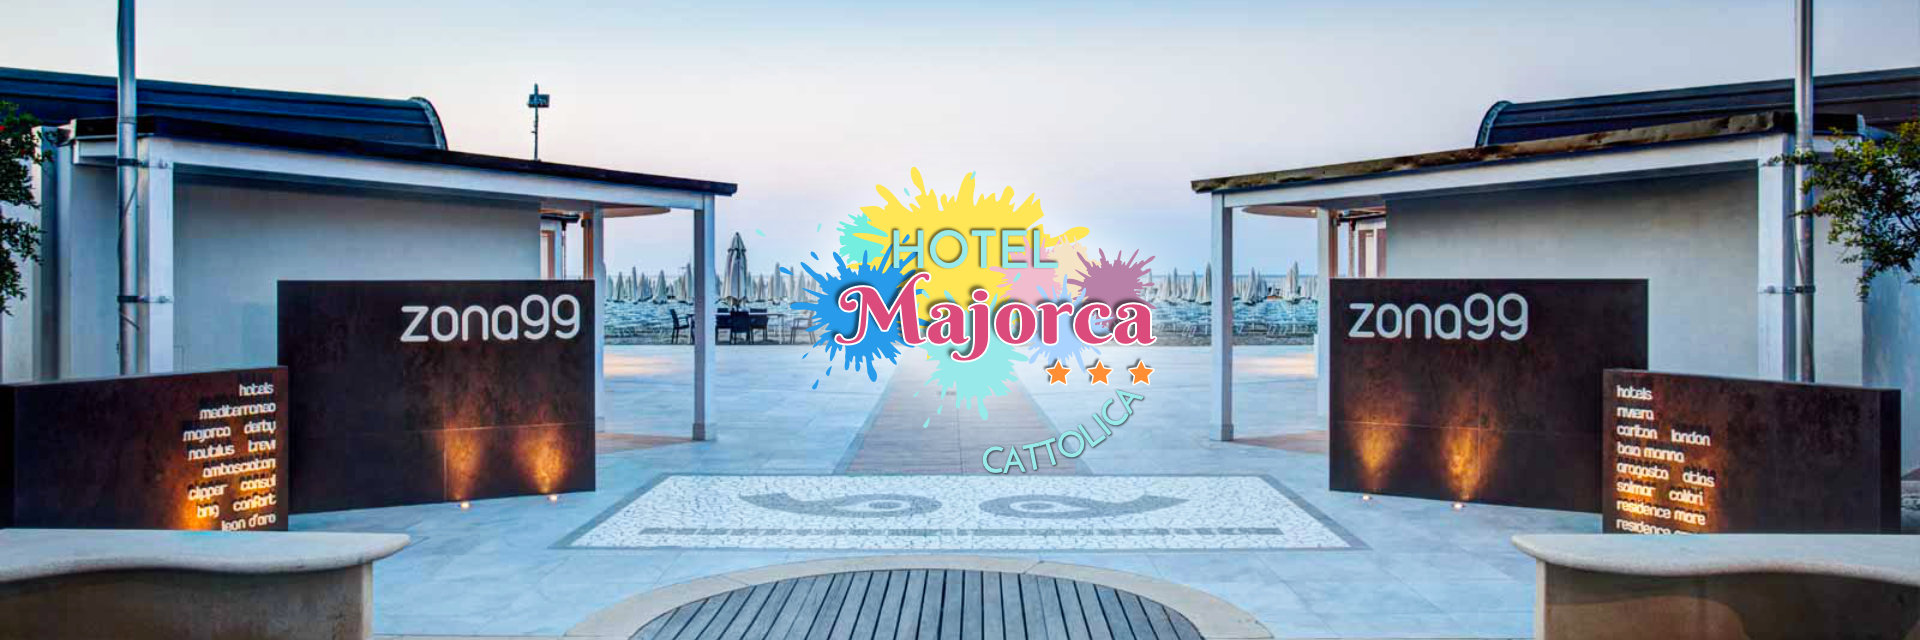 Hotel Majorca - Just Bed Hotel Cattolica